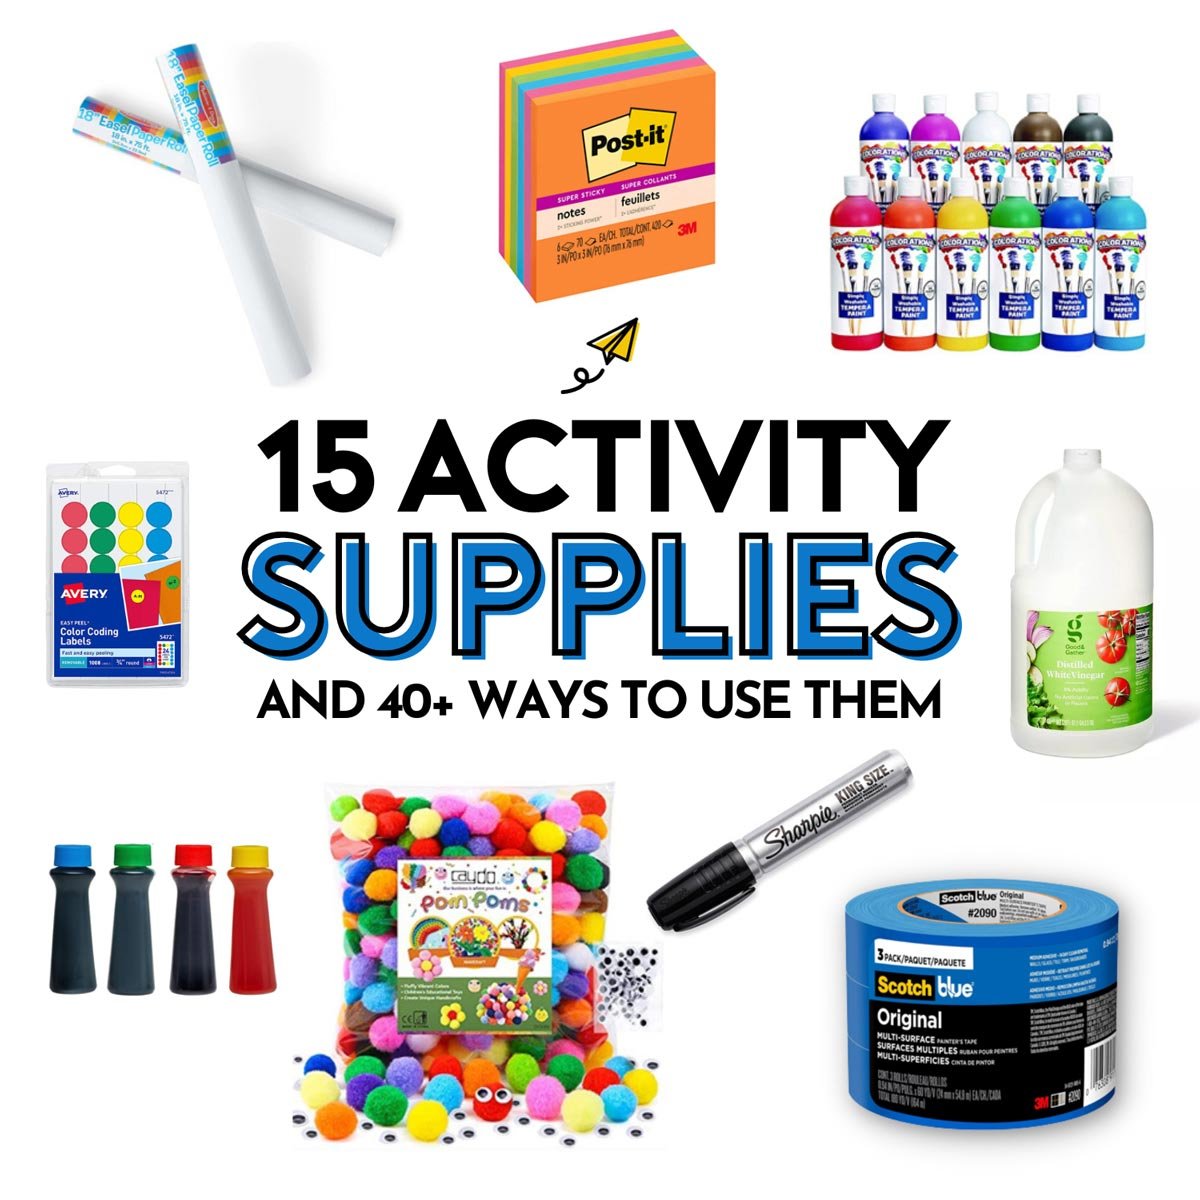 15 Activity Supplies and 40 Ways to Use Them: White image with 8 supply photos